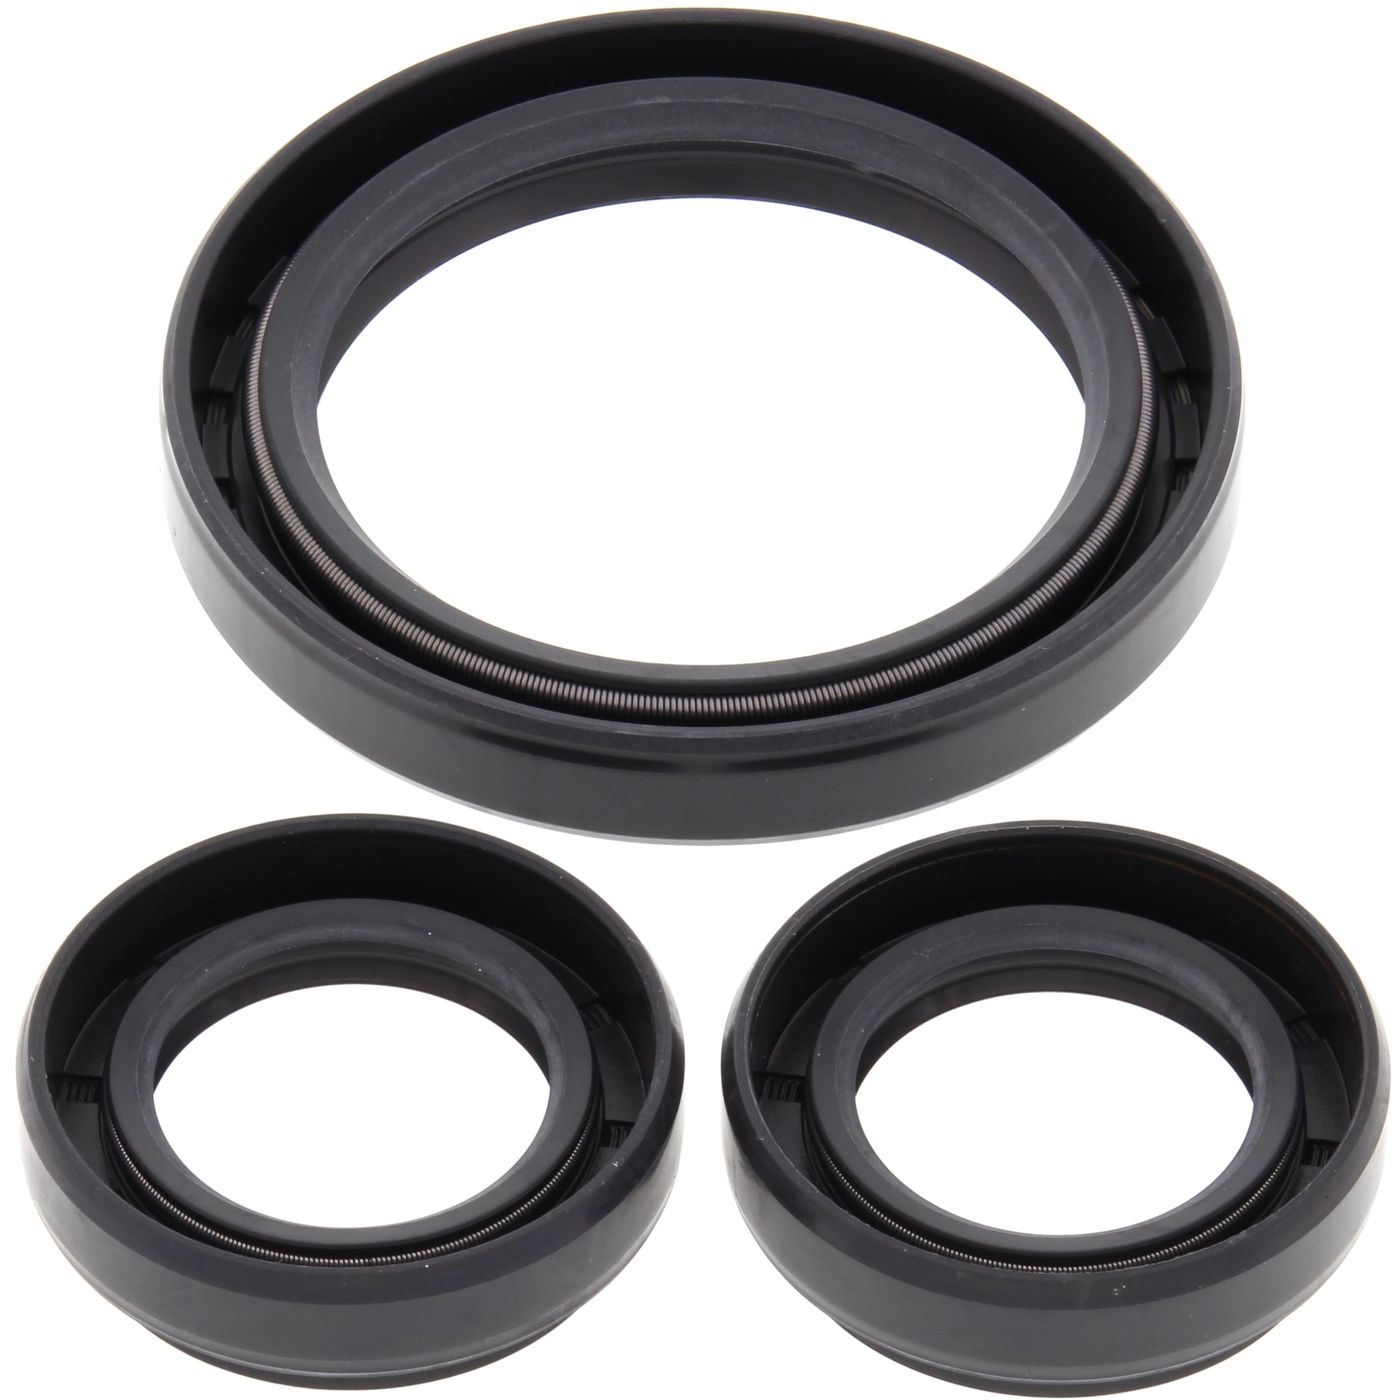 Wrp Diff Seal Kits - WRP252044-5 image